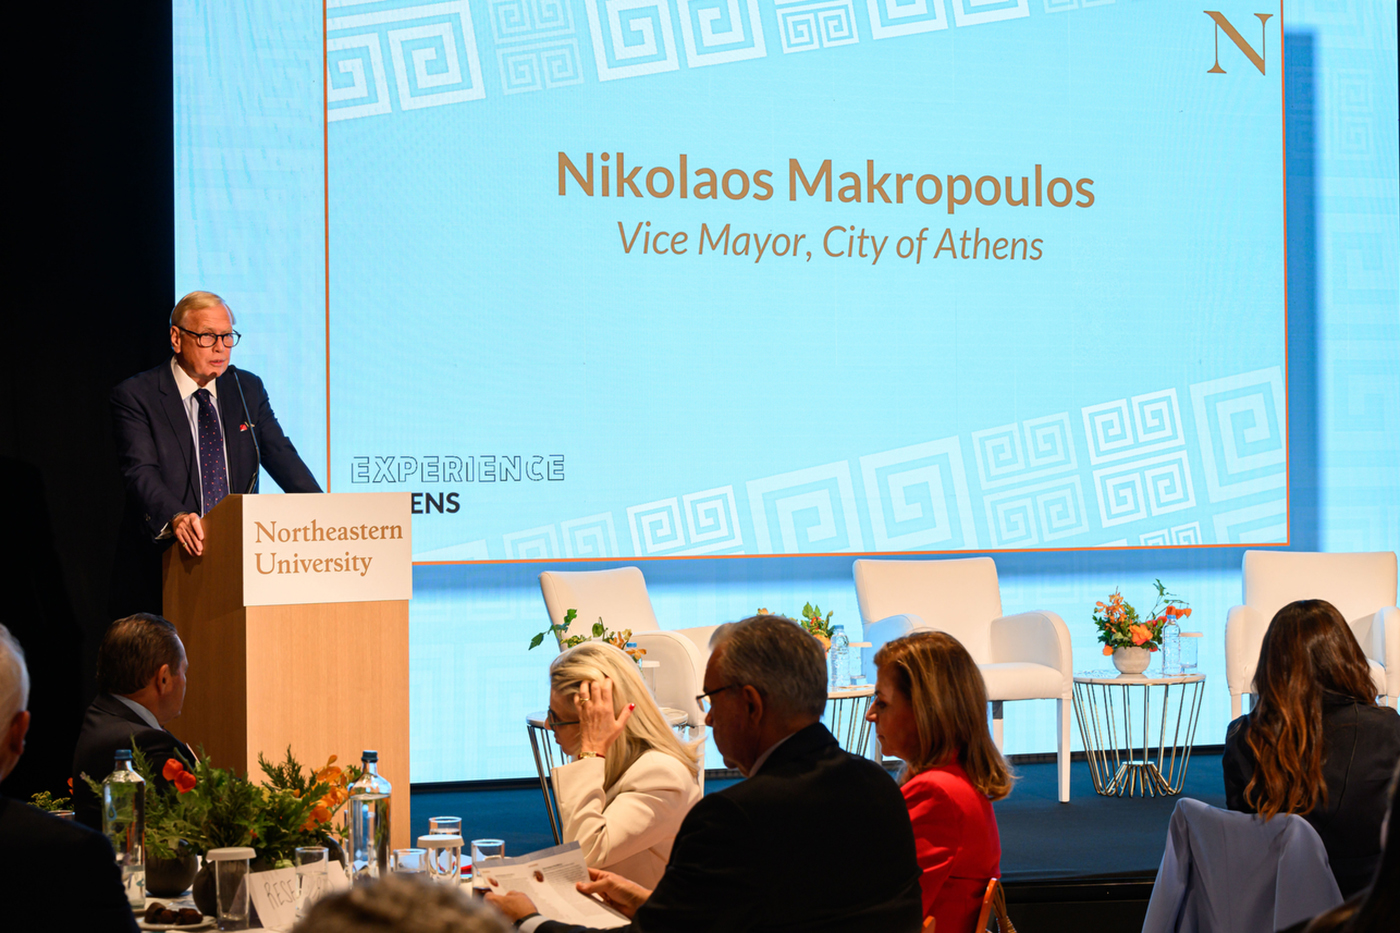 Nikolaos Makropoulos speaking at the “Experience Athens: Intergenerational Leaders Exchange" event.